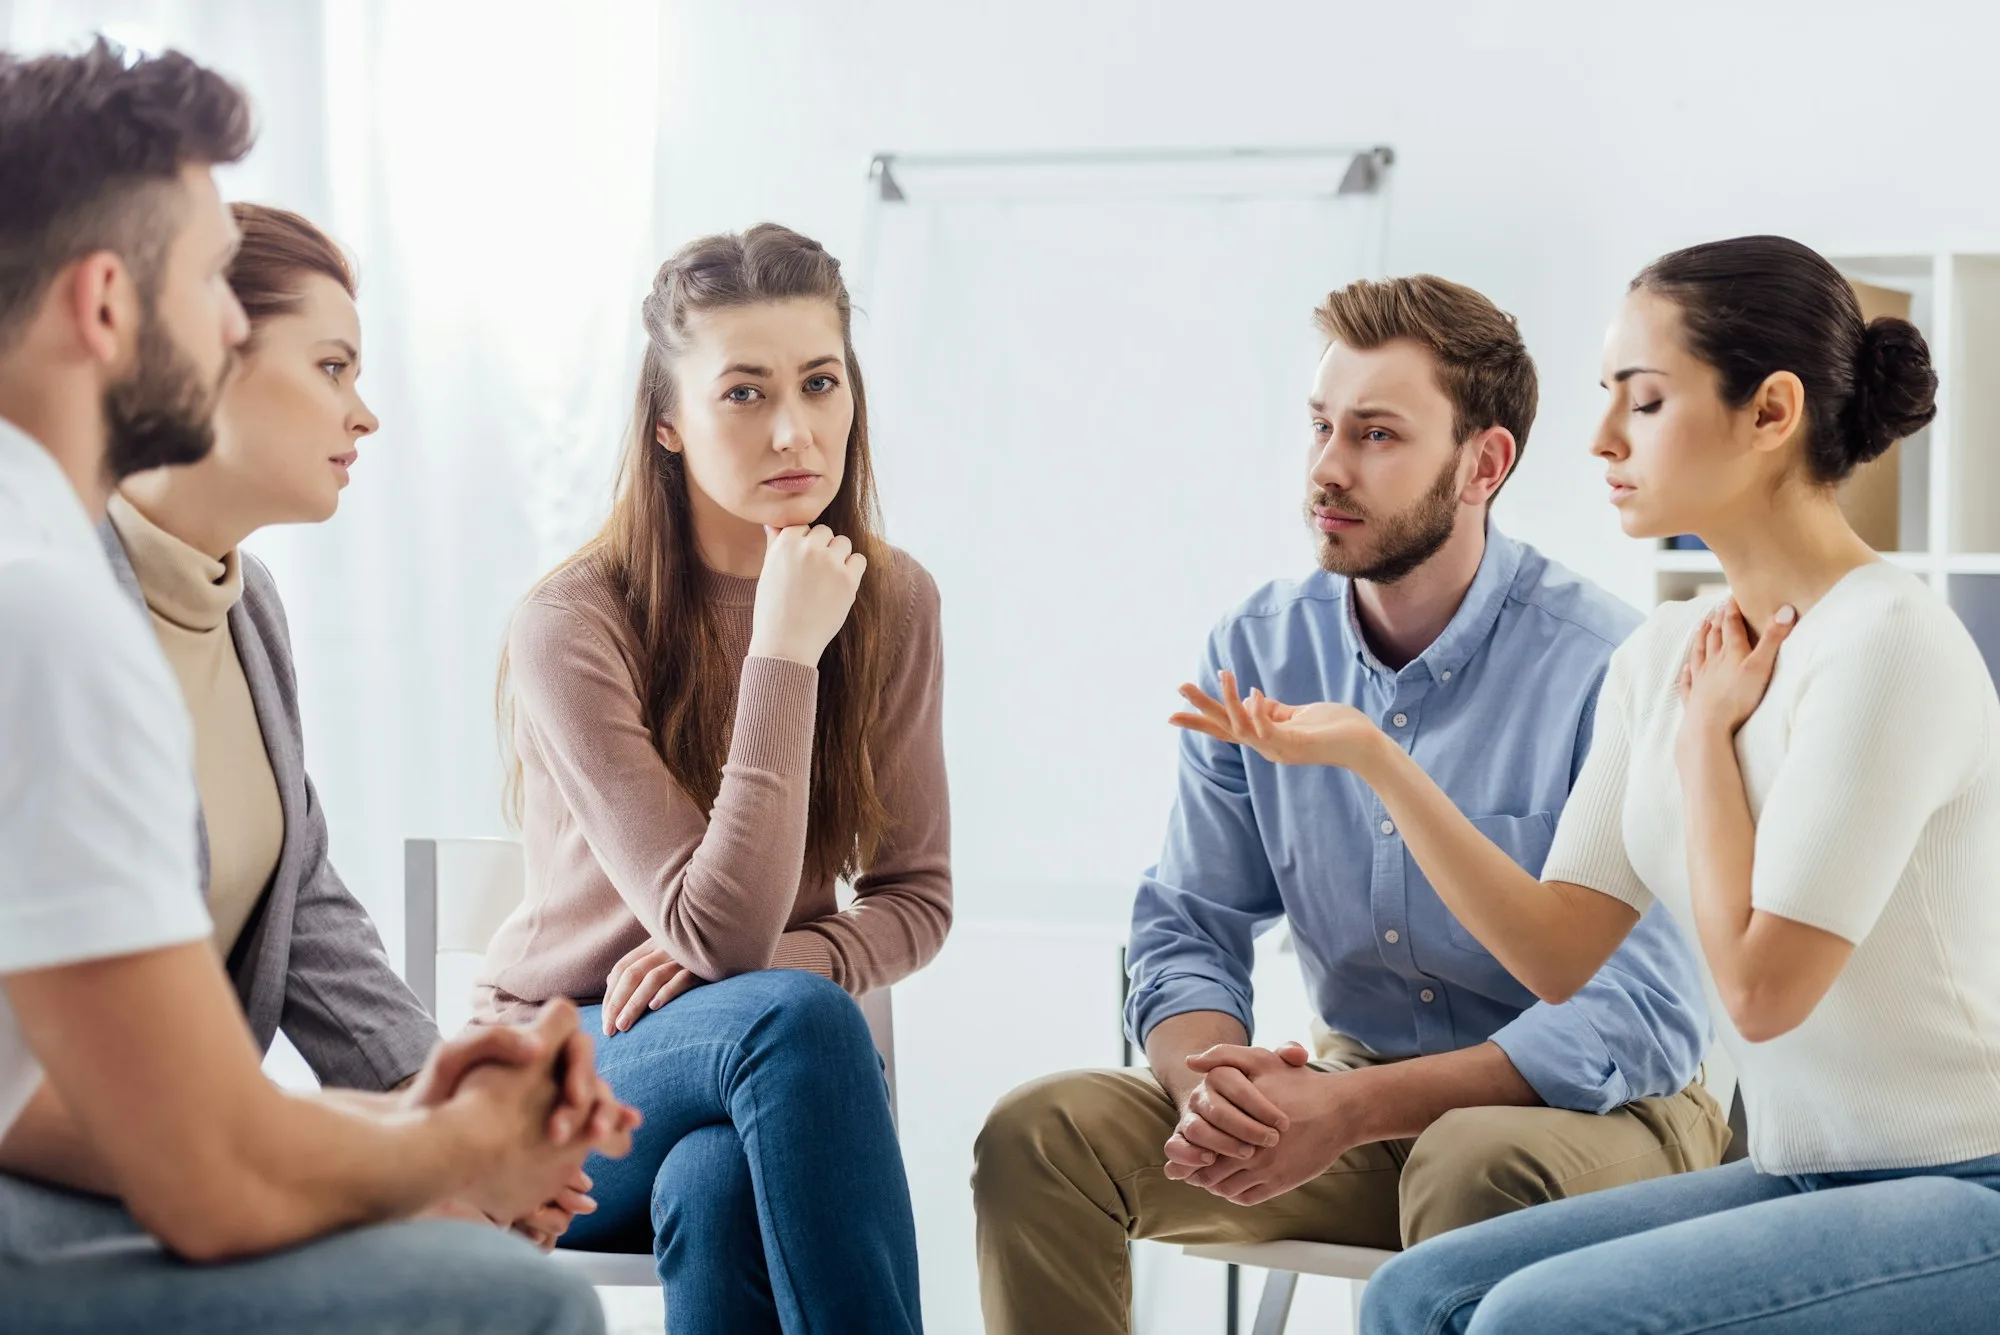 people sitting on chairs and having discussion during support group meeting